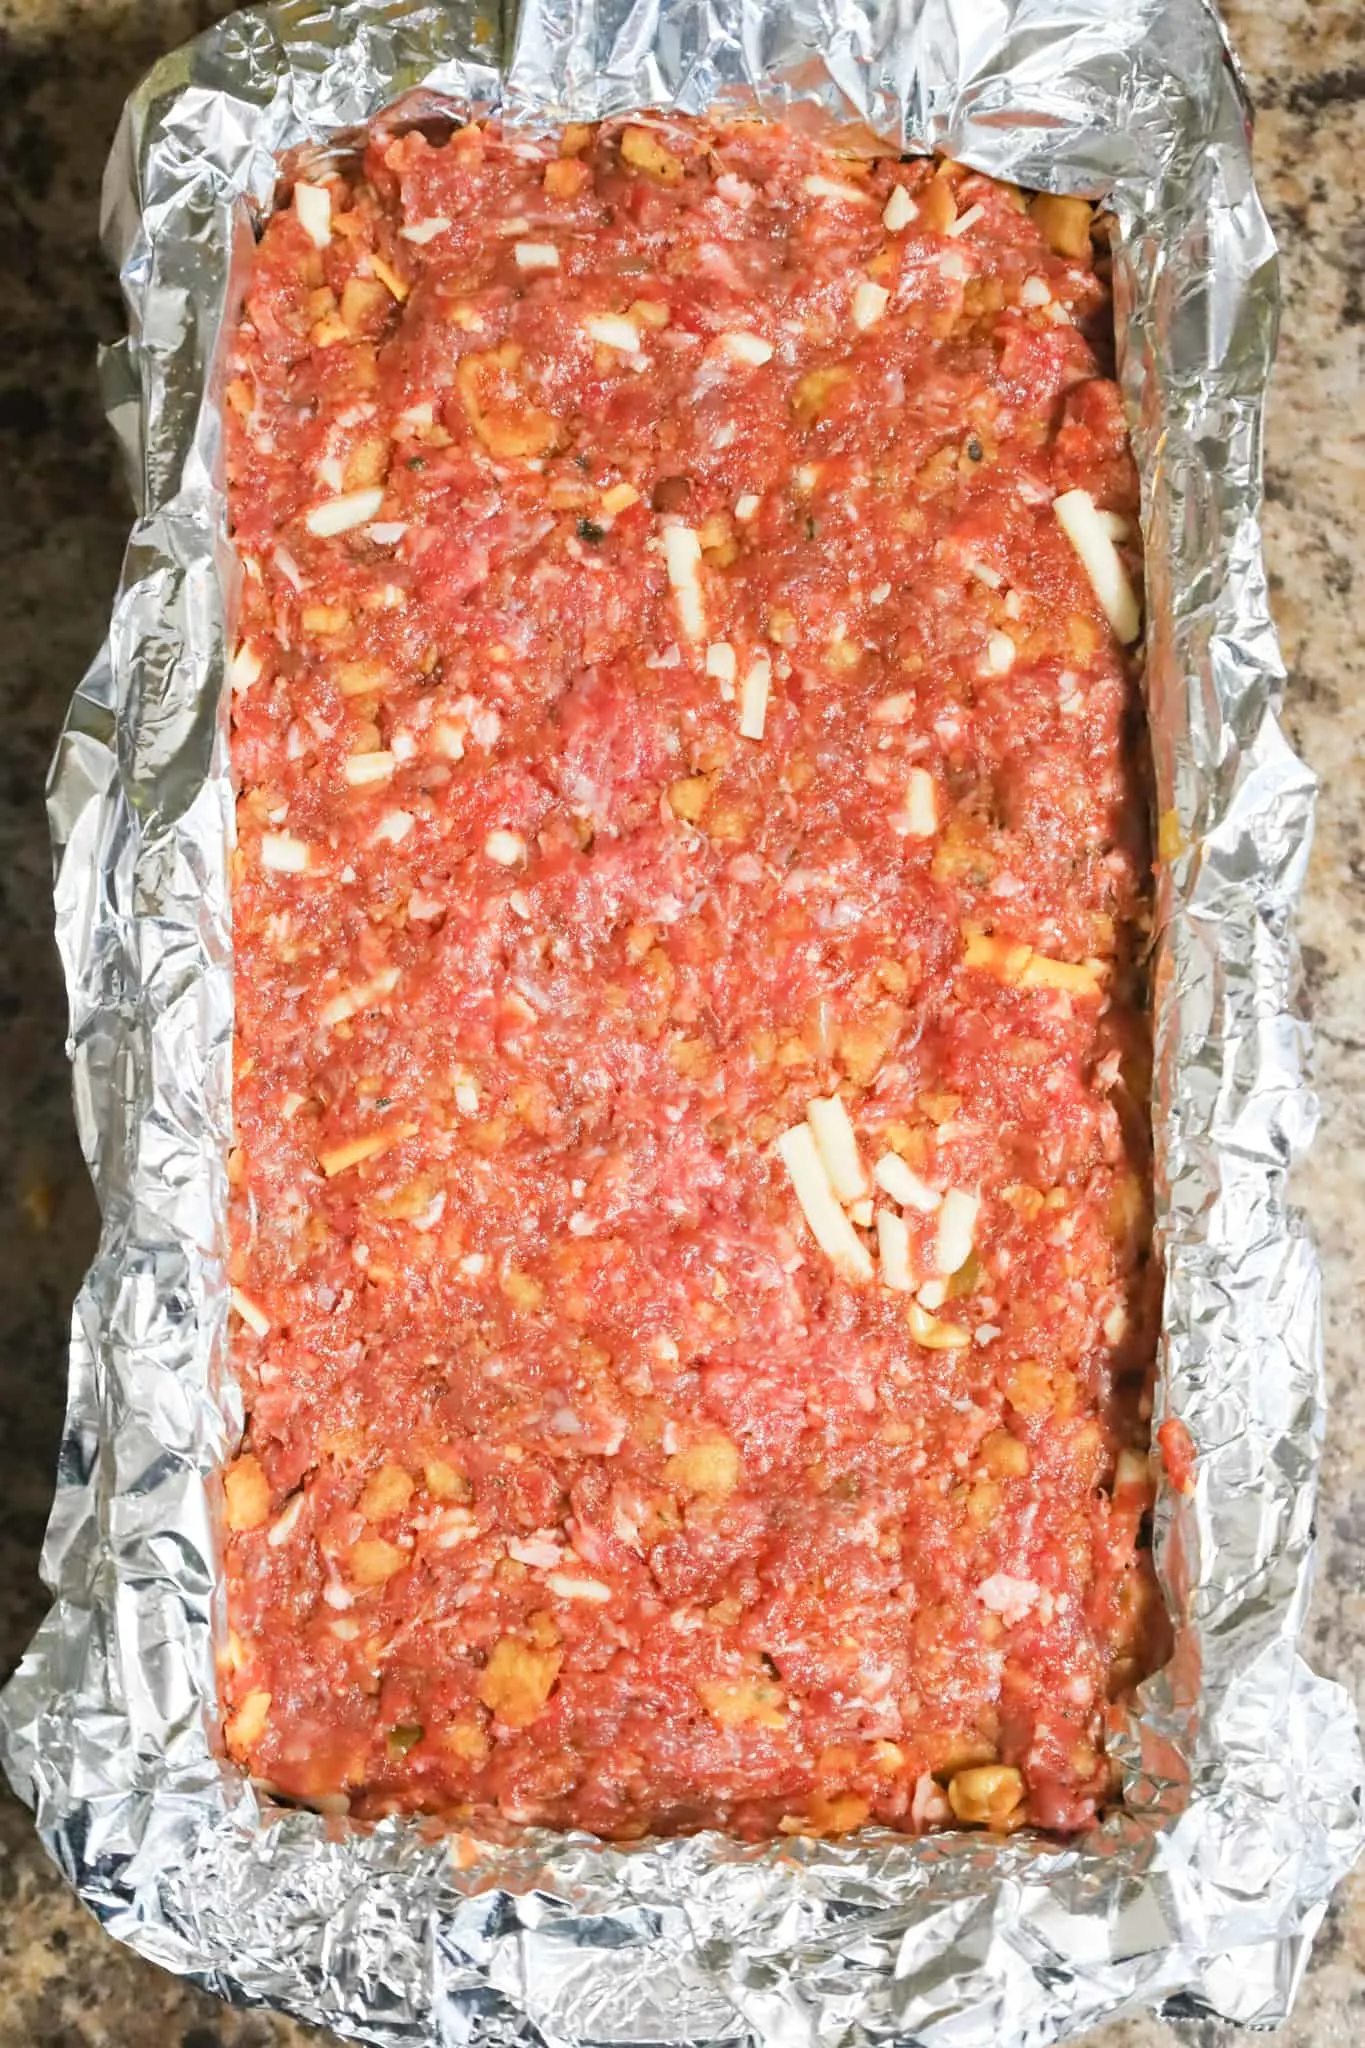 meatloaf mixture in a loaf pan before cooking